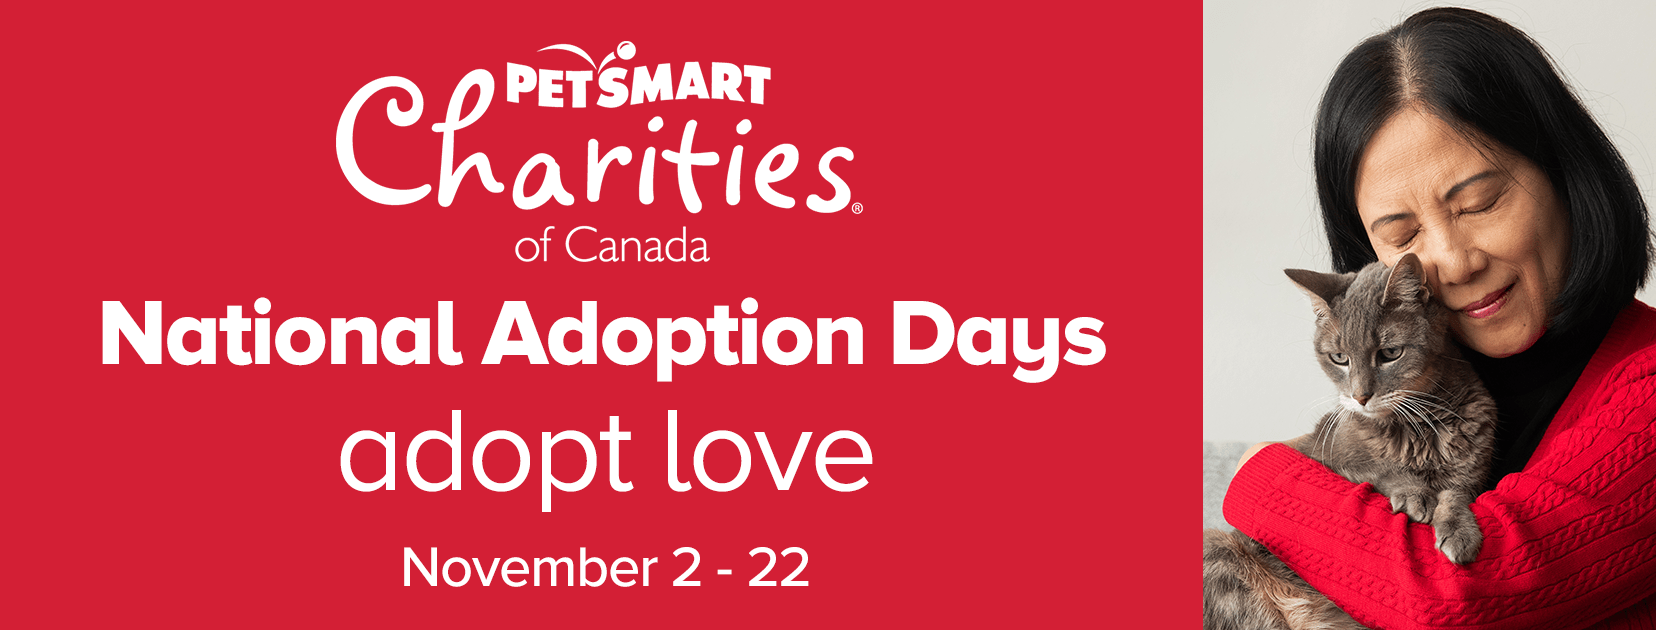 Petsmart Charities National Adoption Days banner is red with white text and on the right is an image of a woman with closed eyes gently hugging a gray cat.